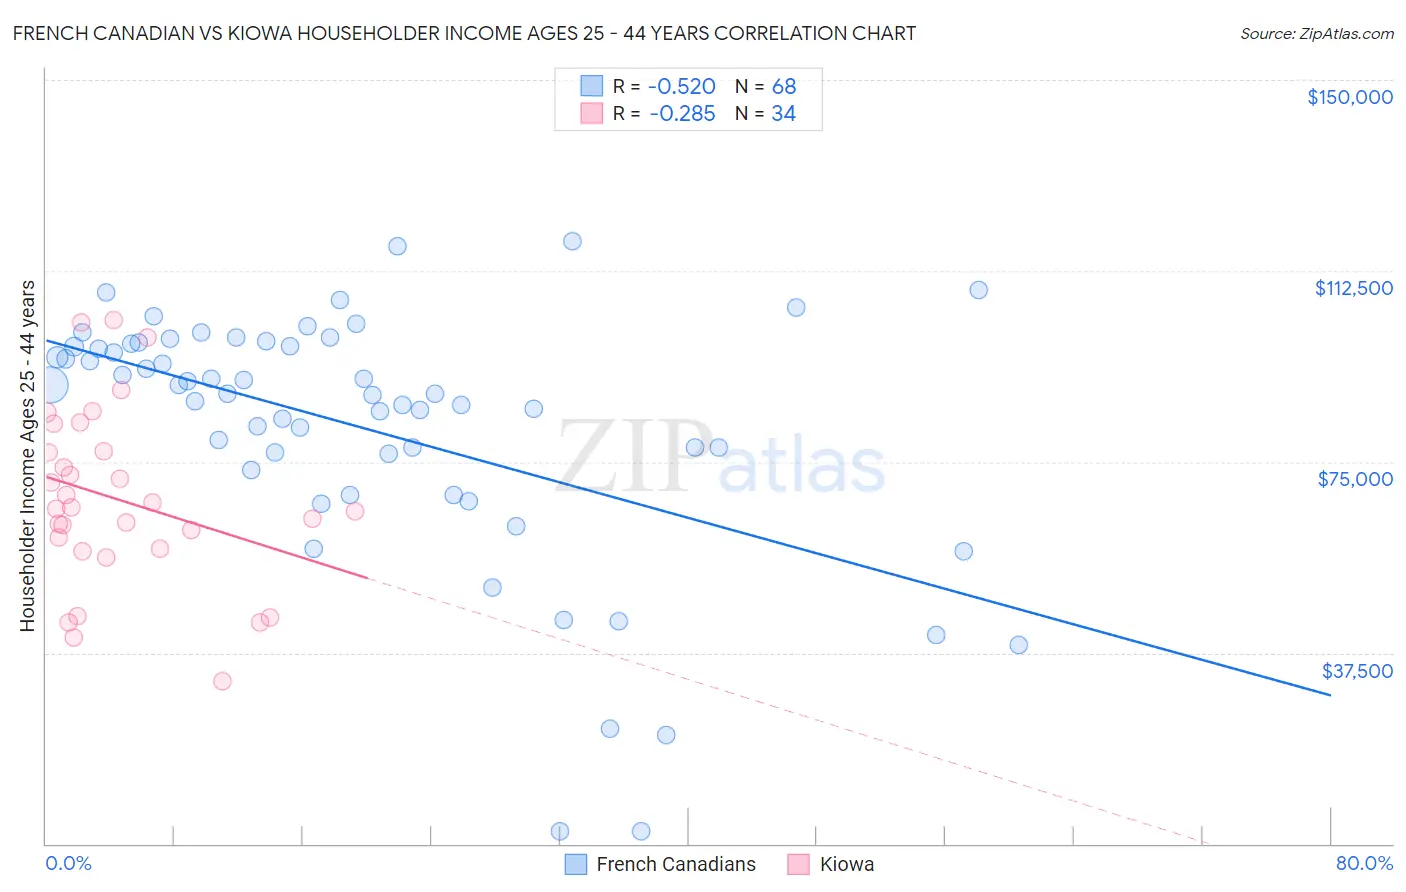 French Canadian vs Kiowa Householder Income Ages 25 - 44 years